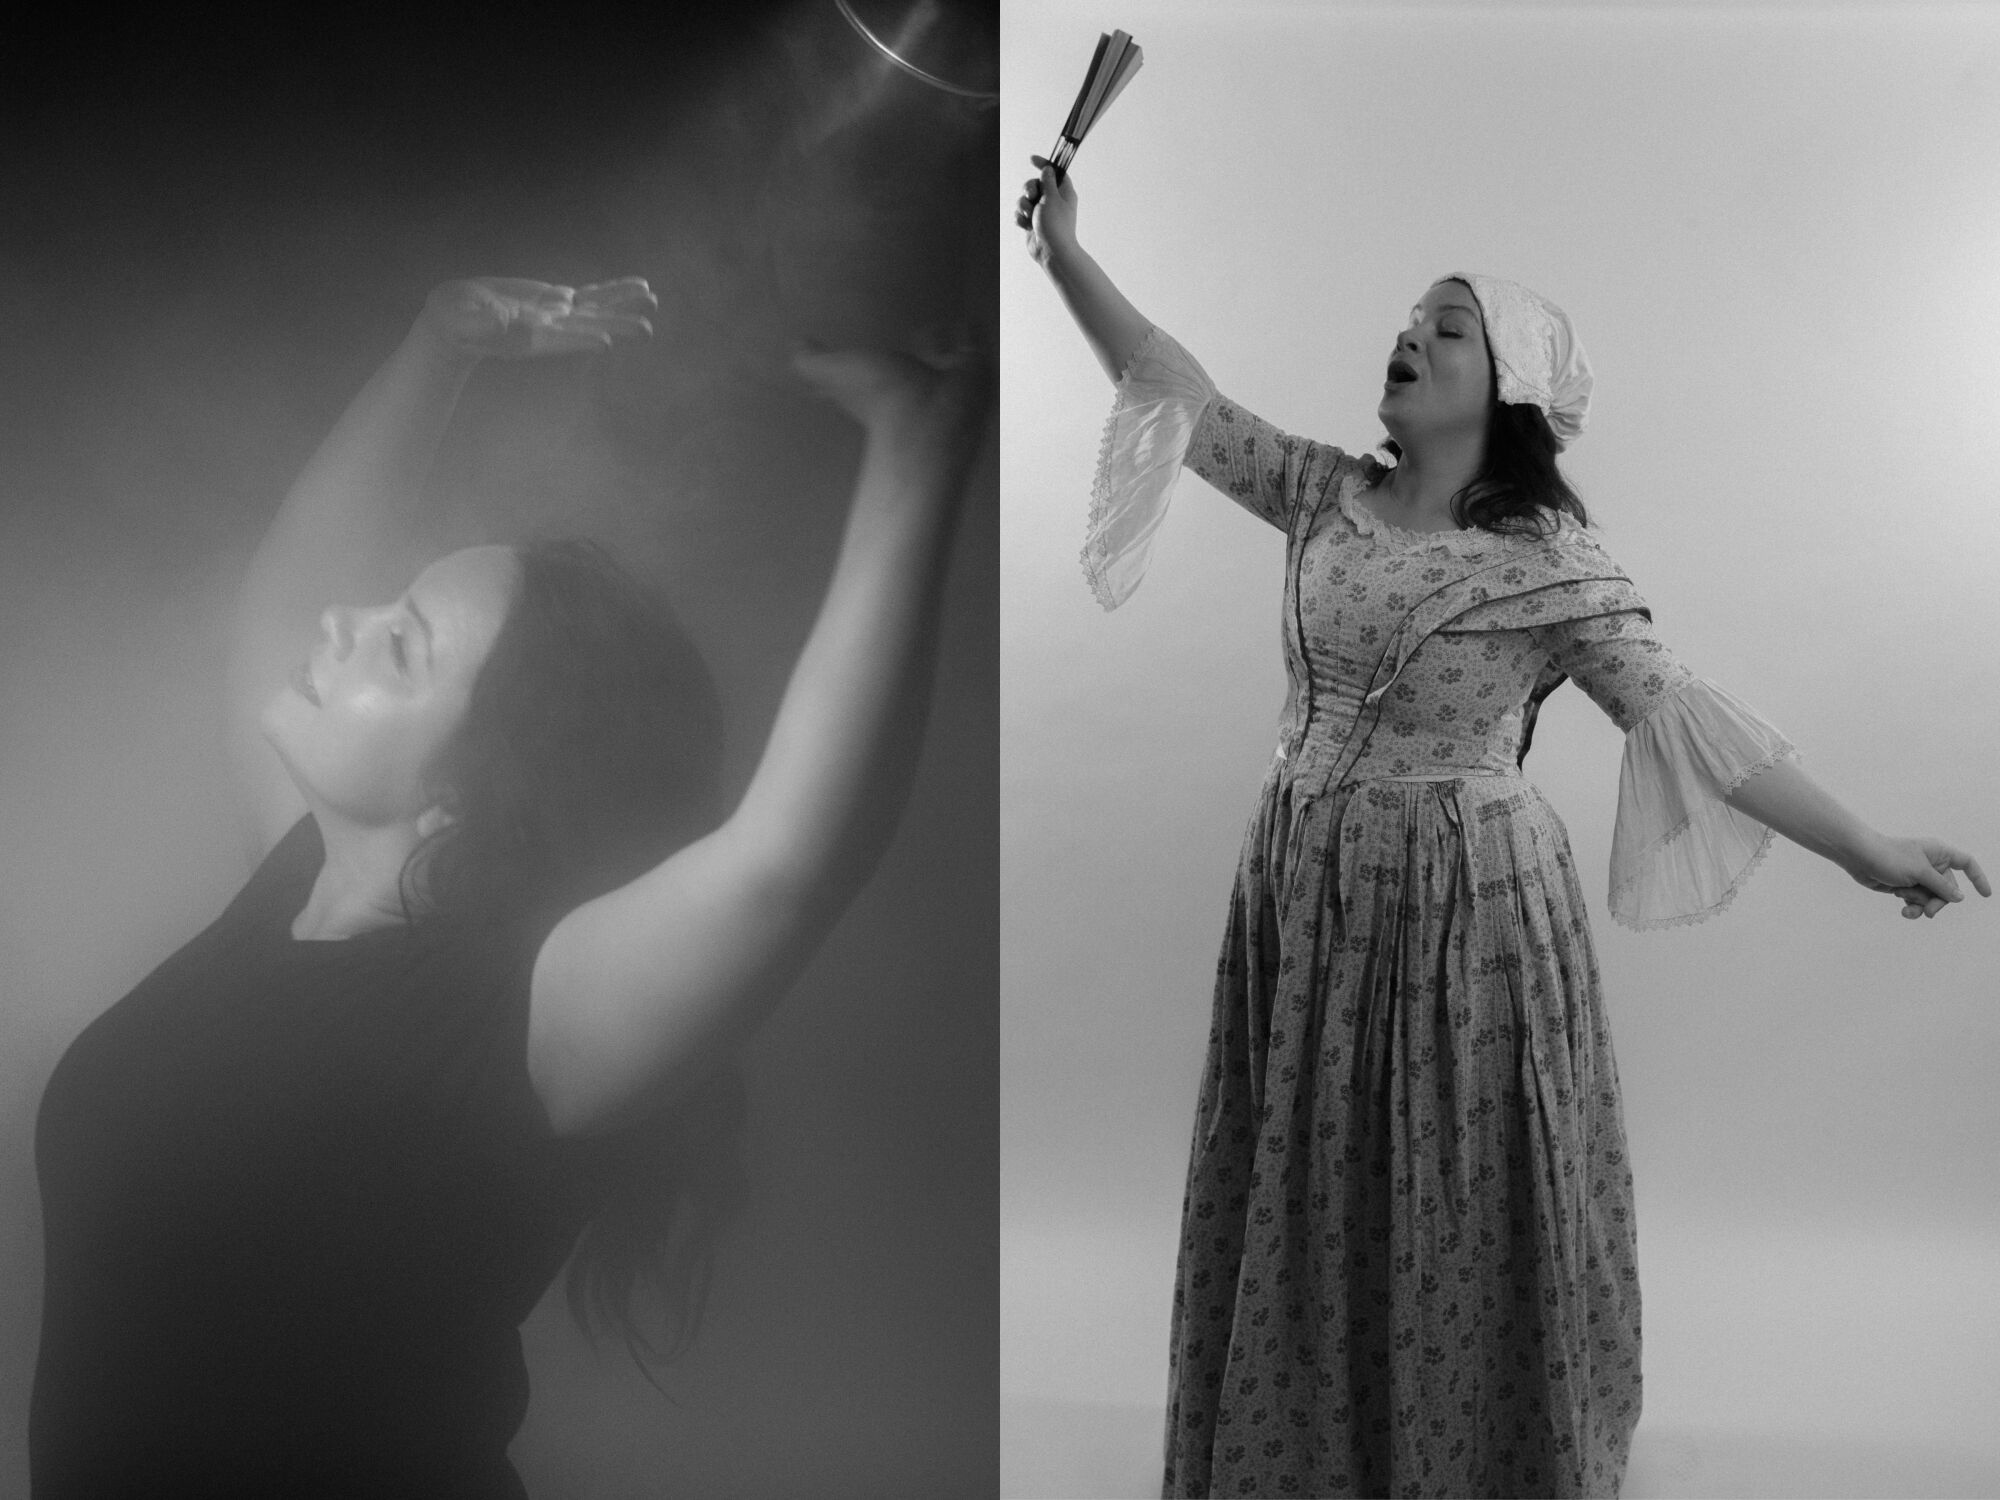 A split image shows a woman in a cloud of mist, left, and wearing a dress and raising a fan in the air, right.